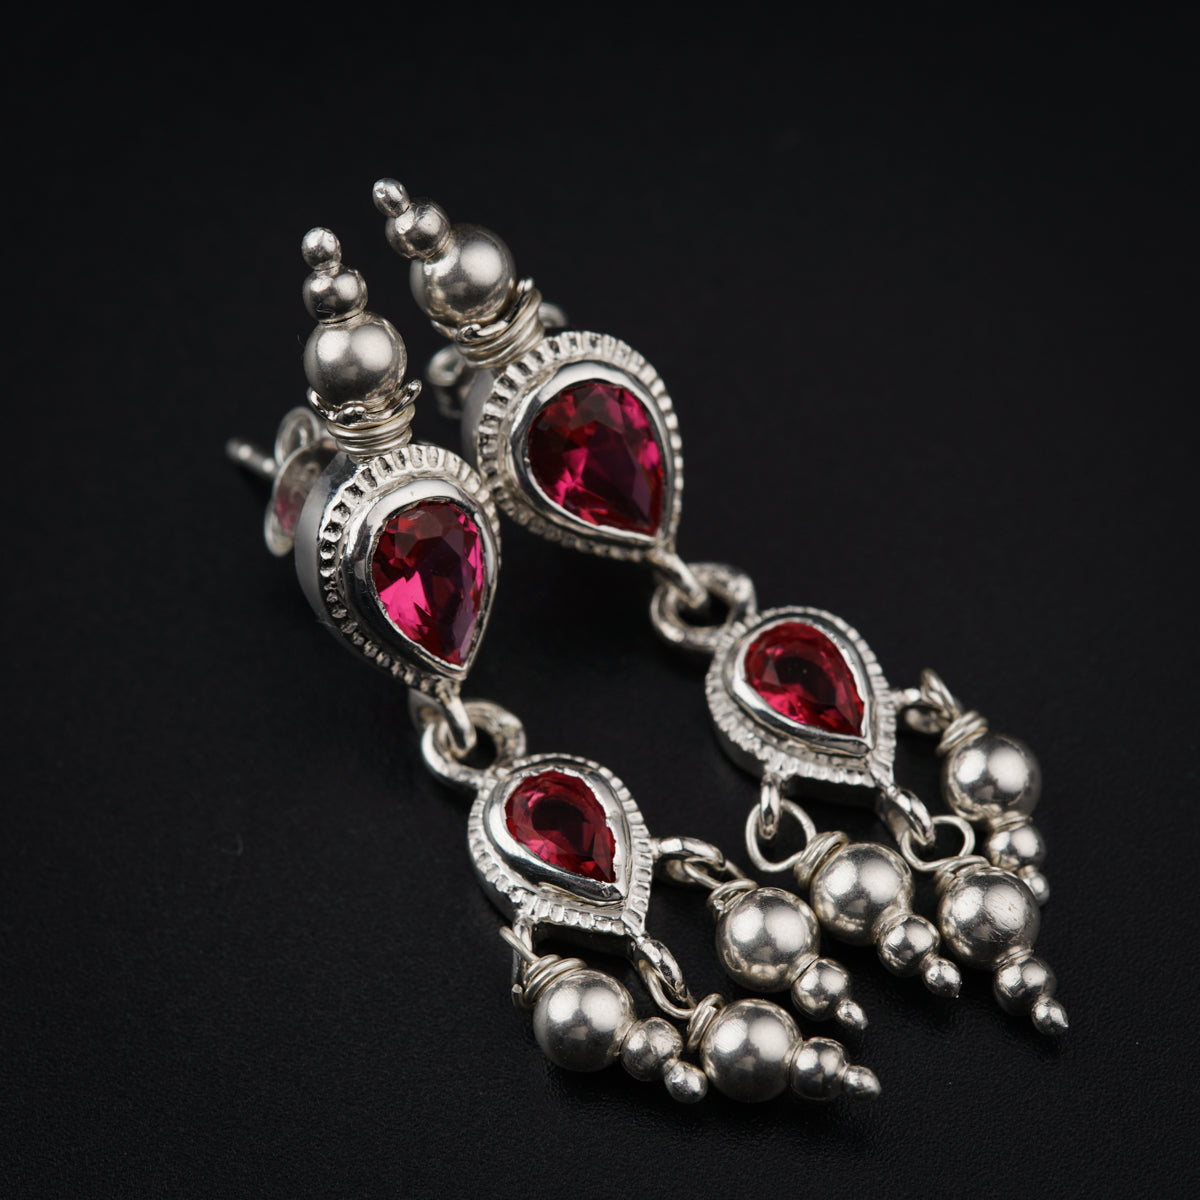 a pair of red and silver earrings on a black background